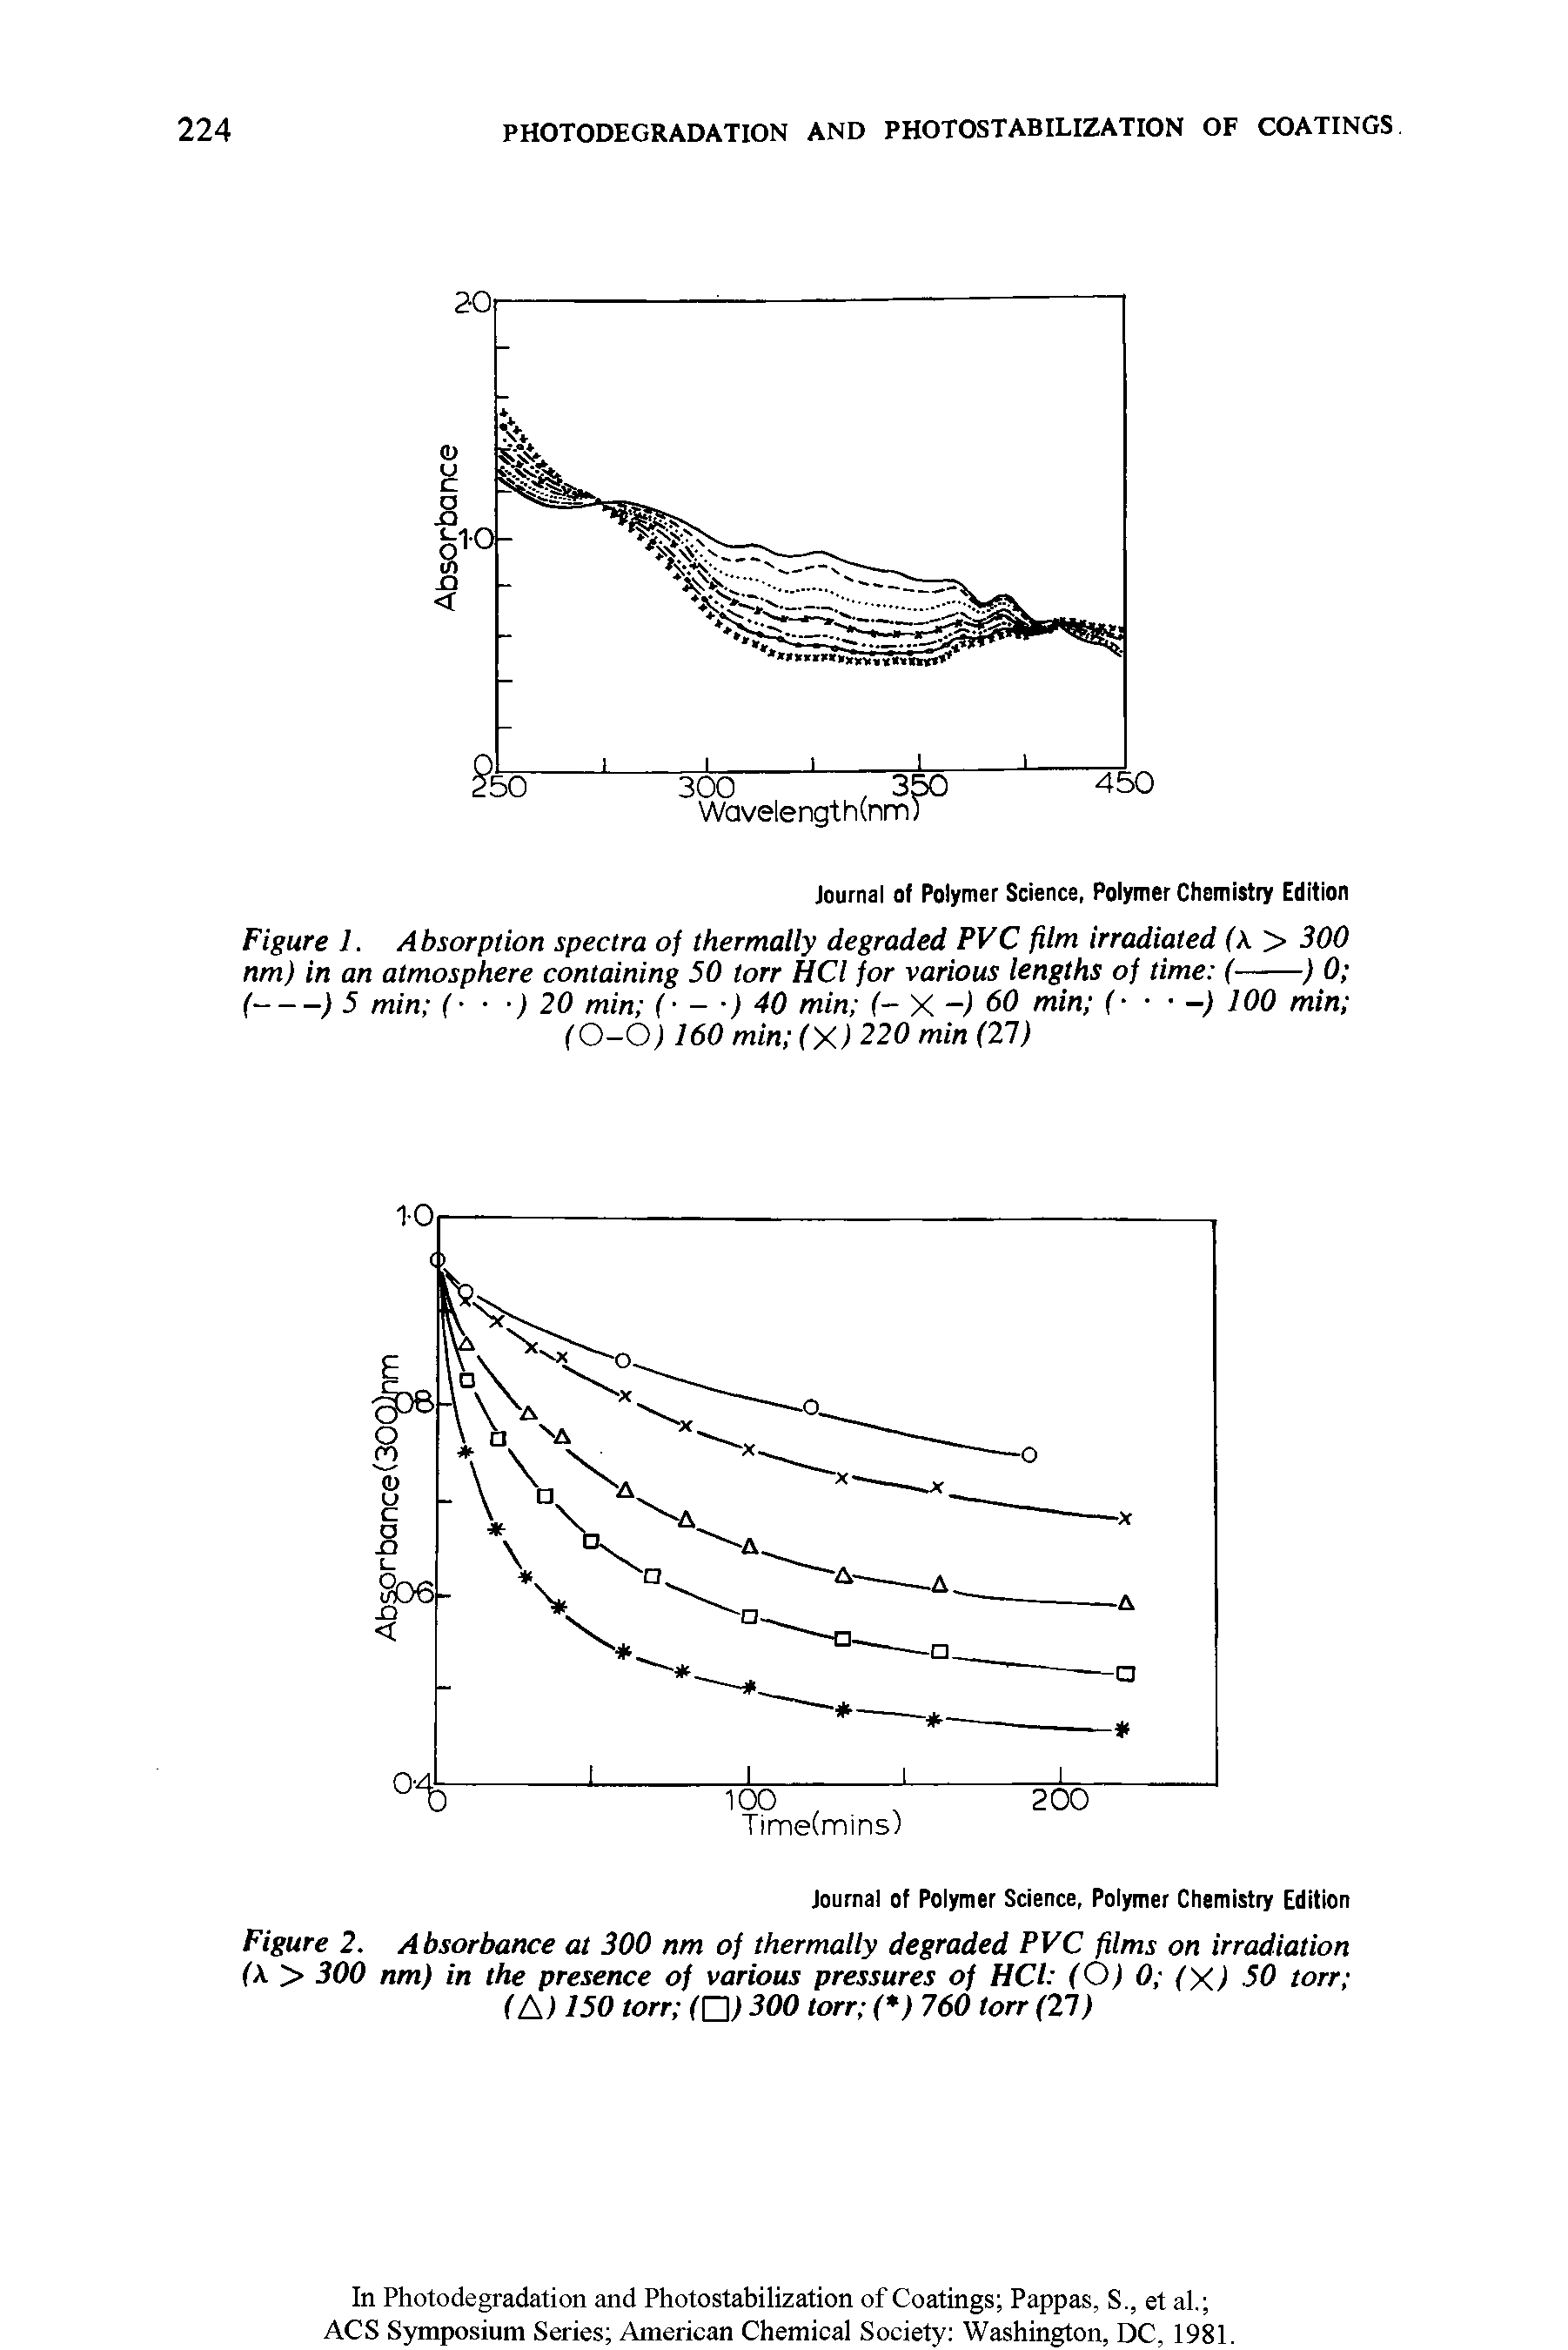 Figure 2. Absorbance at 300 nm of thermally degraded PVC films on irradiation (A. > 300 nm) in the presence of various pressures of HCl (O) 0 (X) 50 torr (A) 150 torr ( Z ) 300 torr ( ) 760 torr (27)...